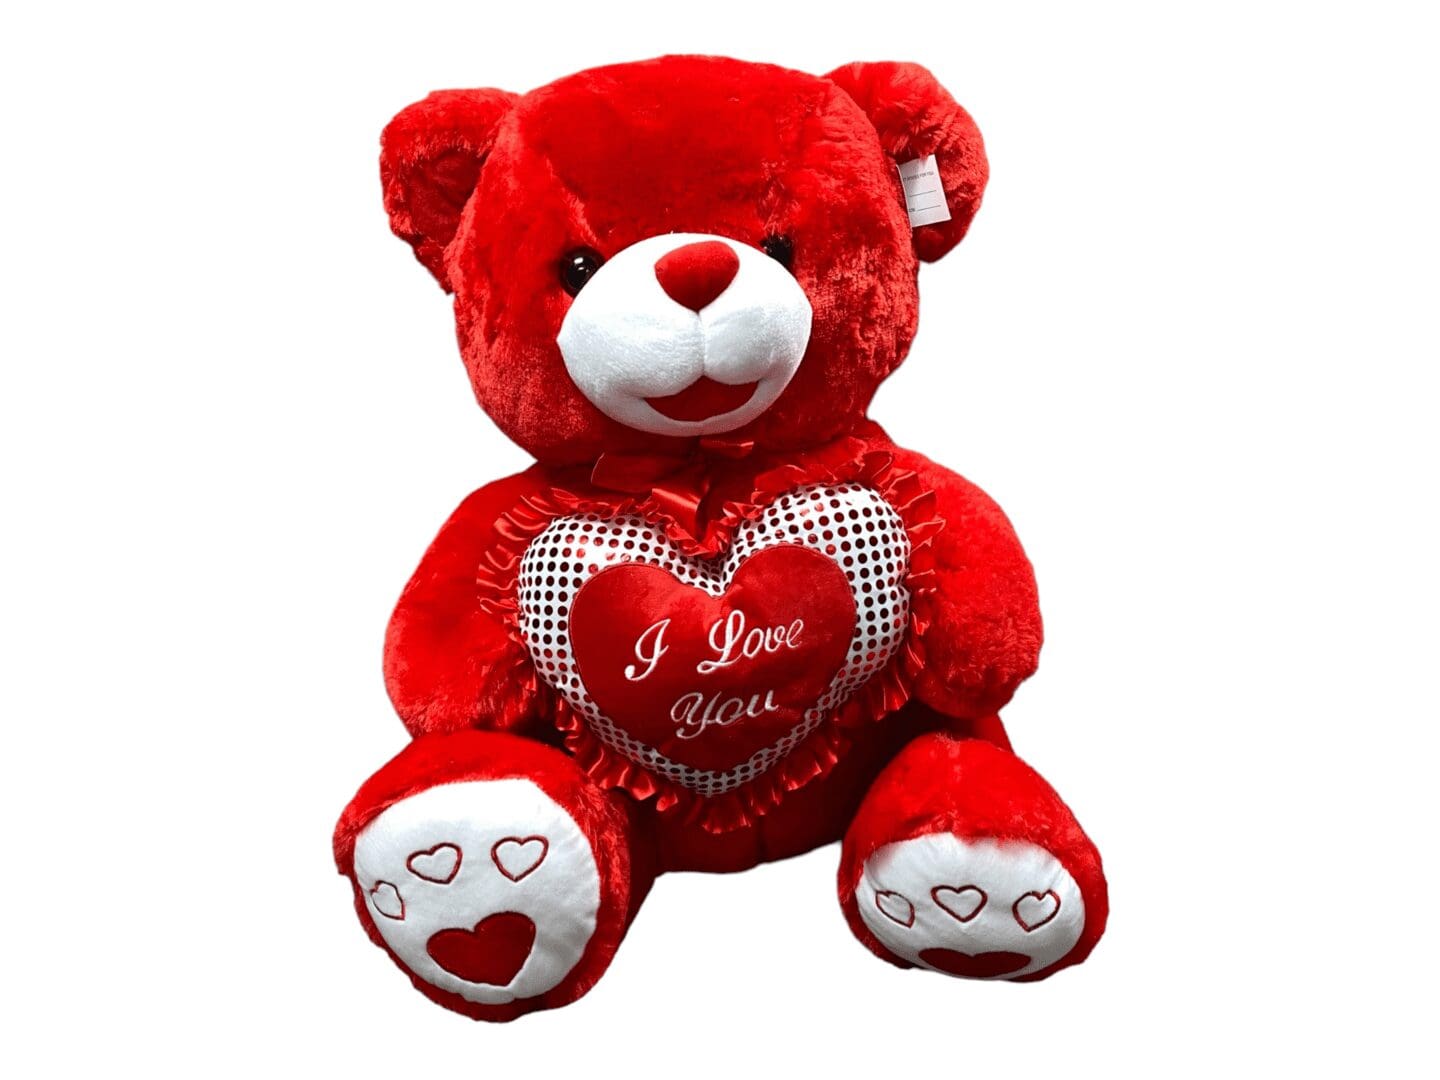 Gt7922 red teddy bear 25 that says I love You